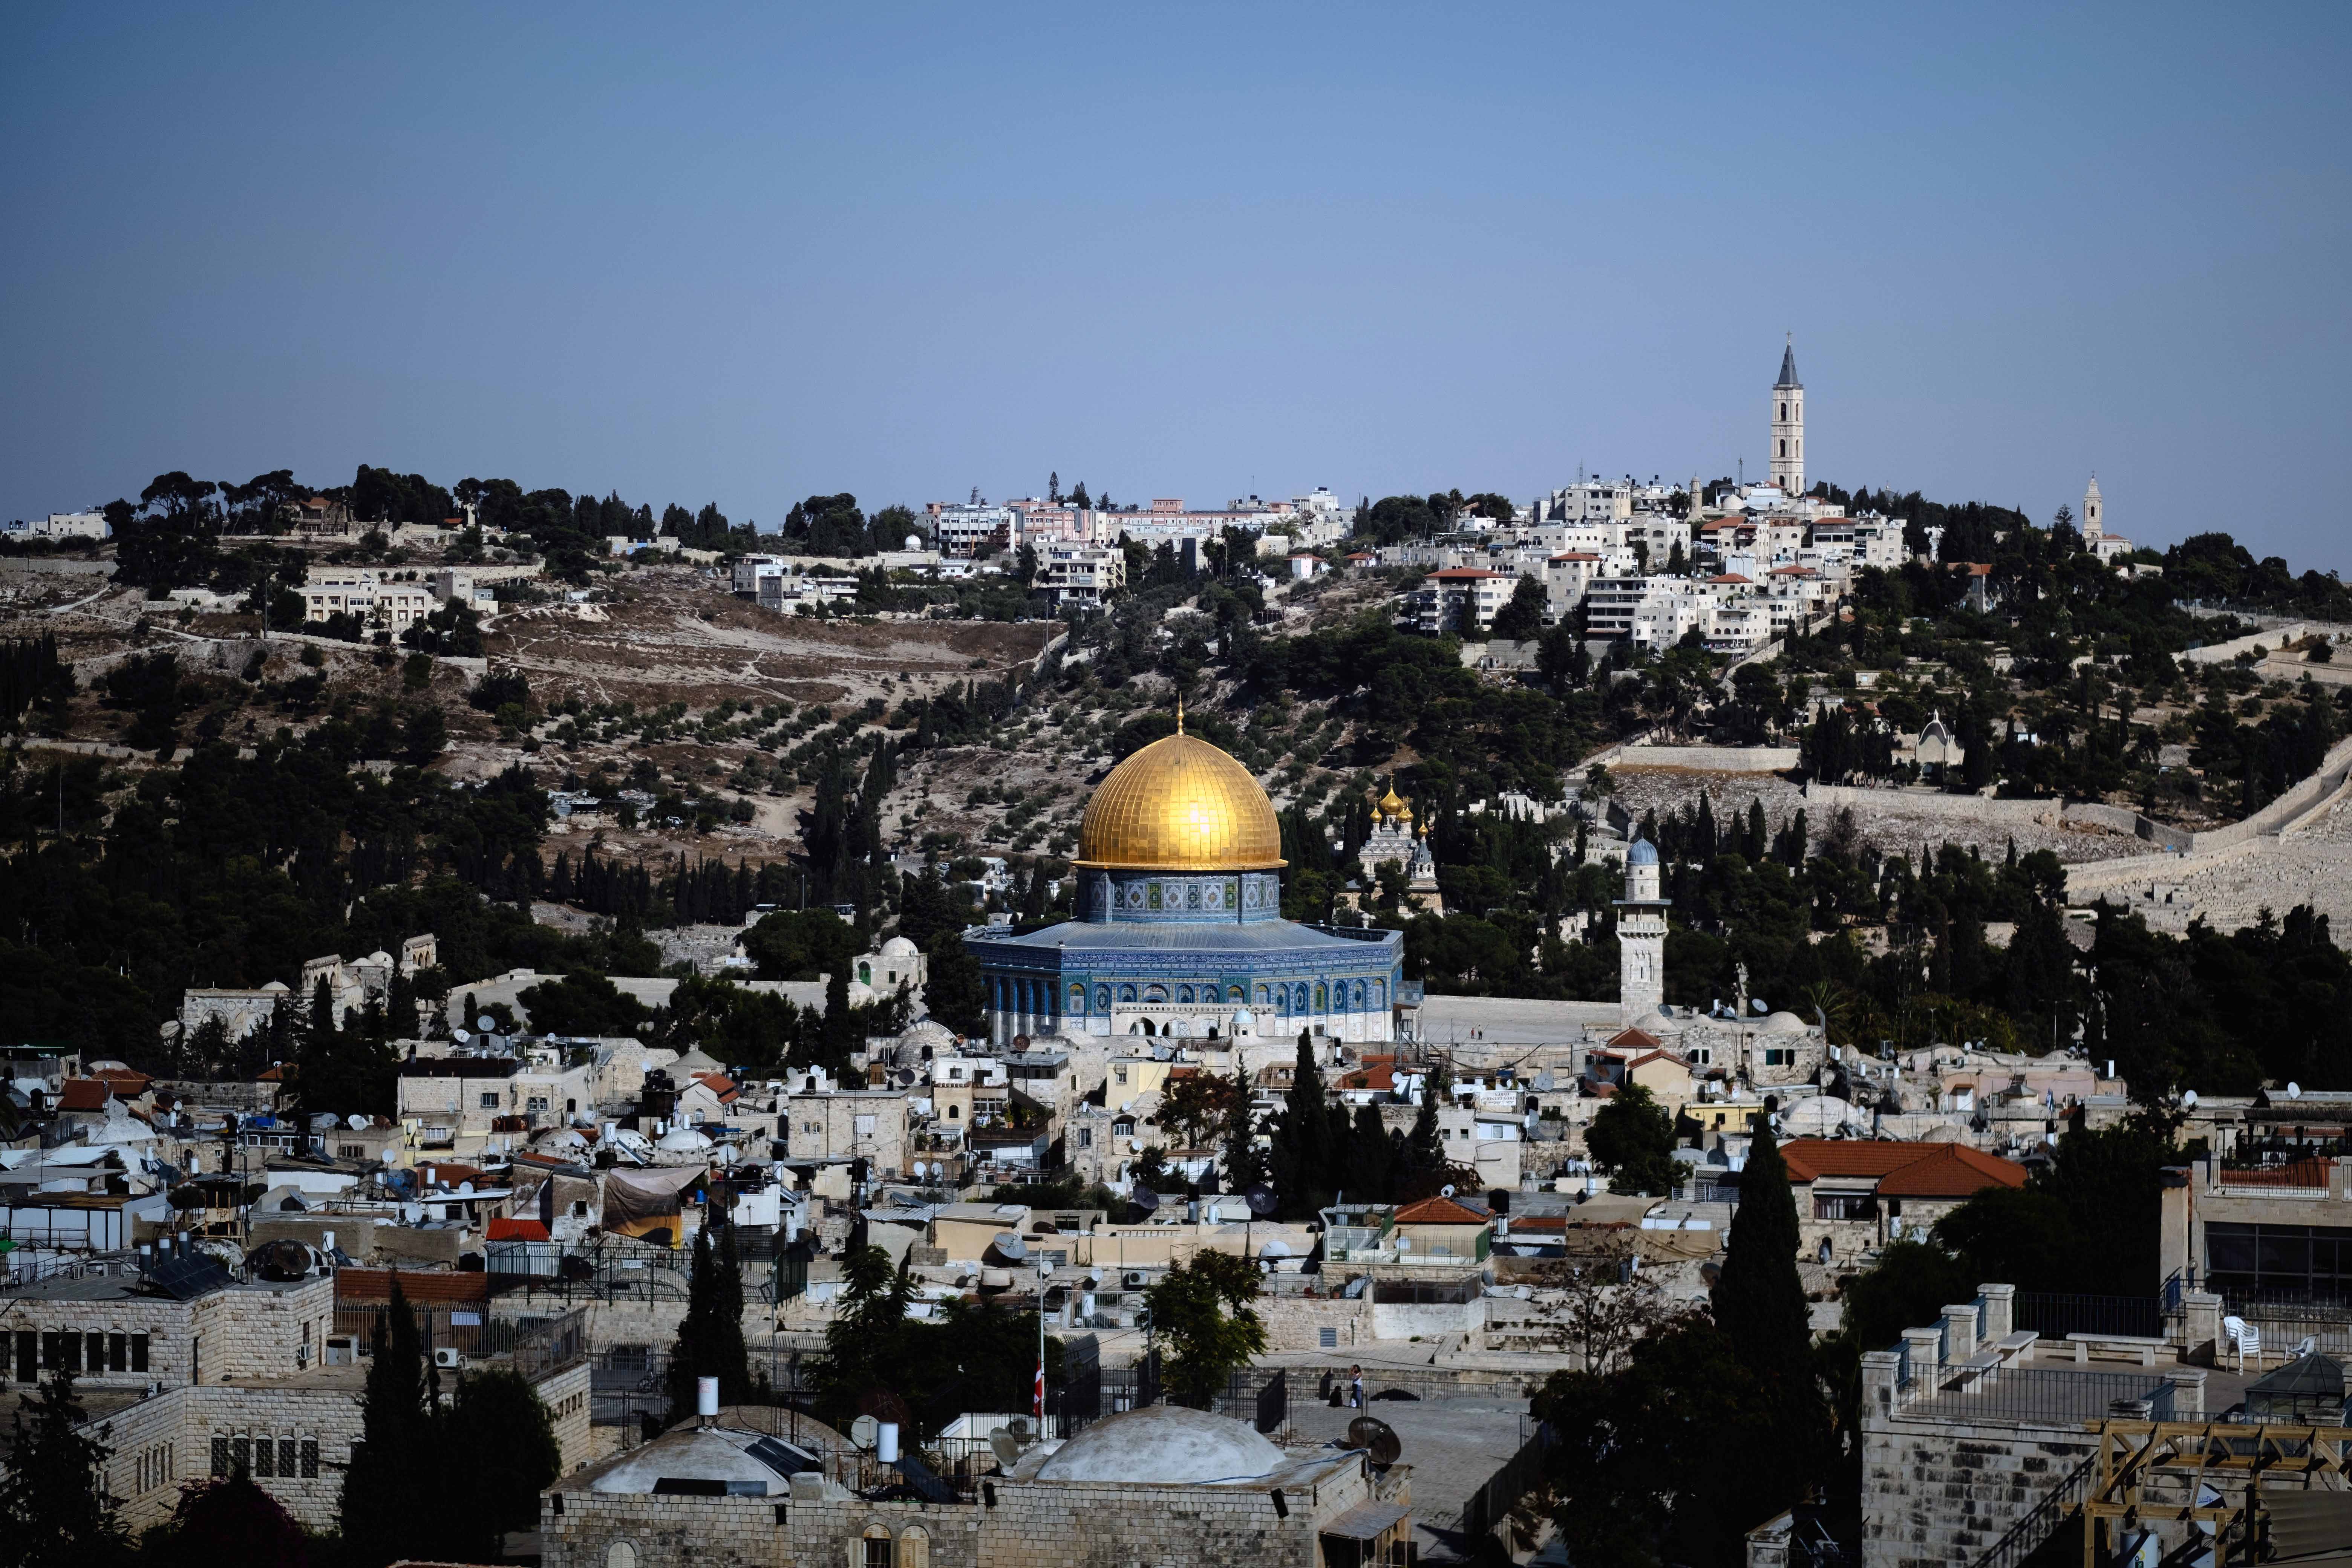 The Al Asqa Mosque and Temple Mount